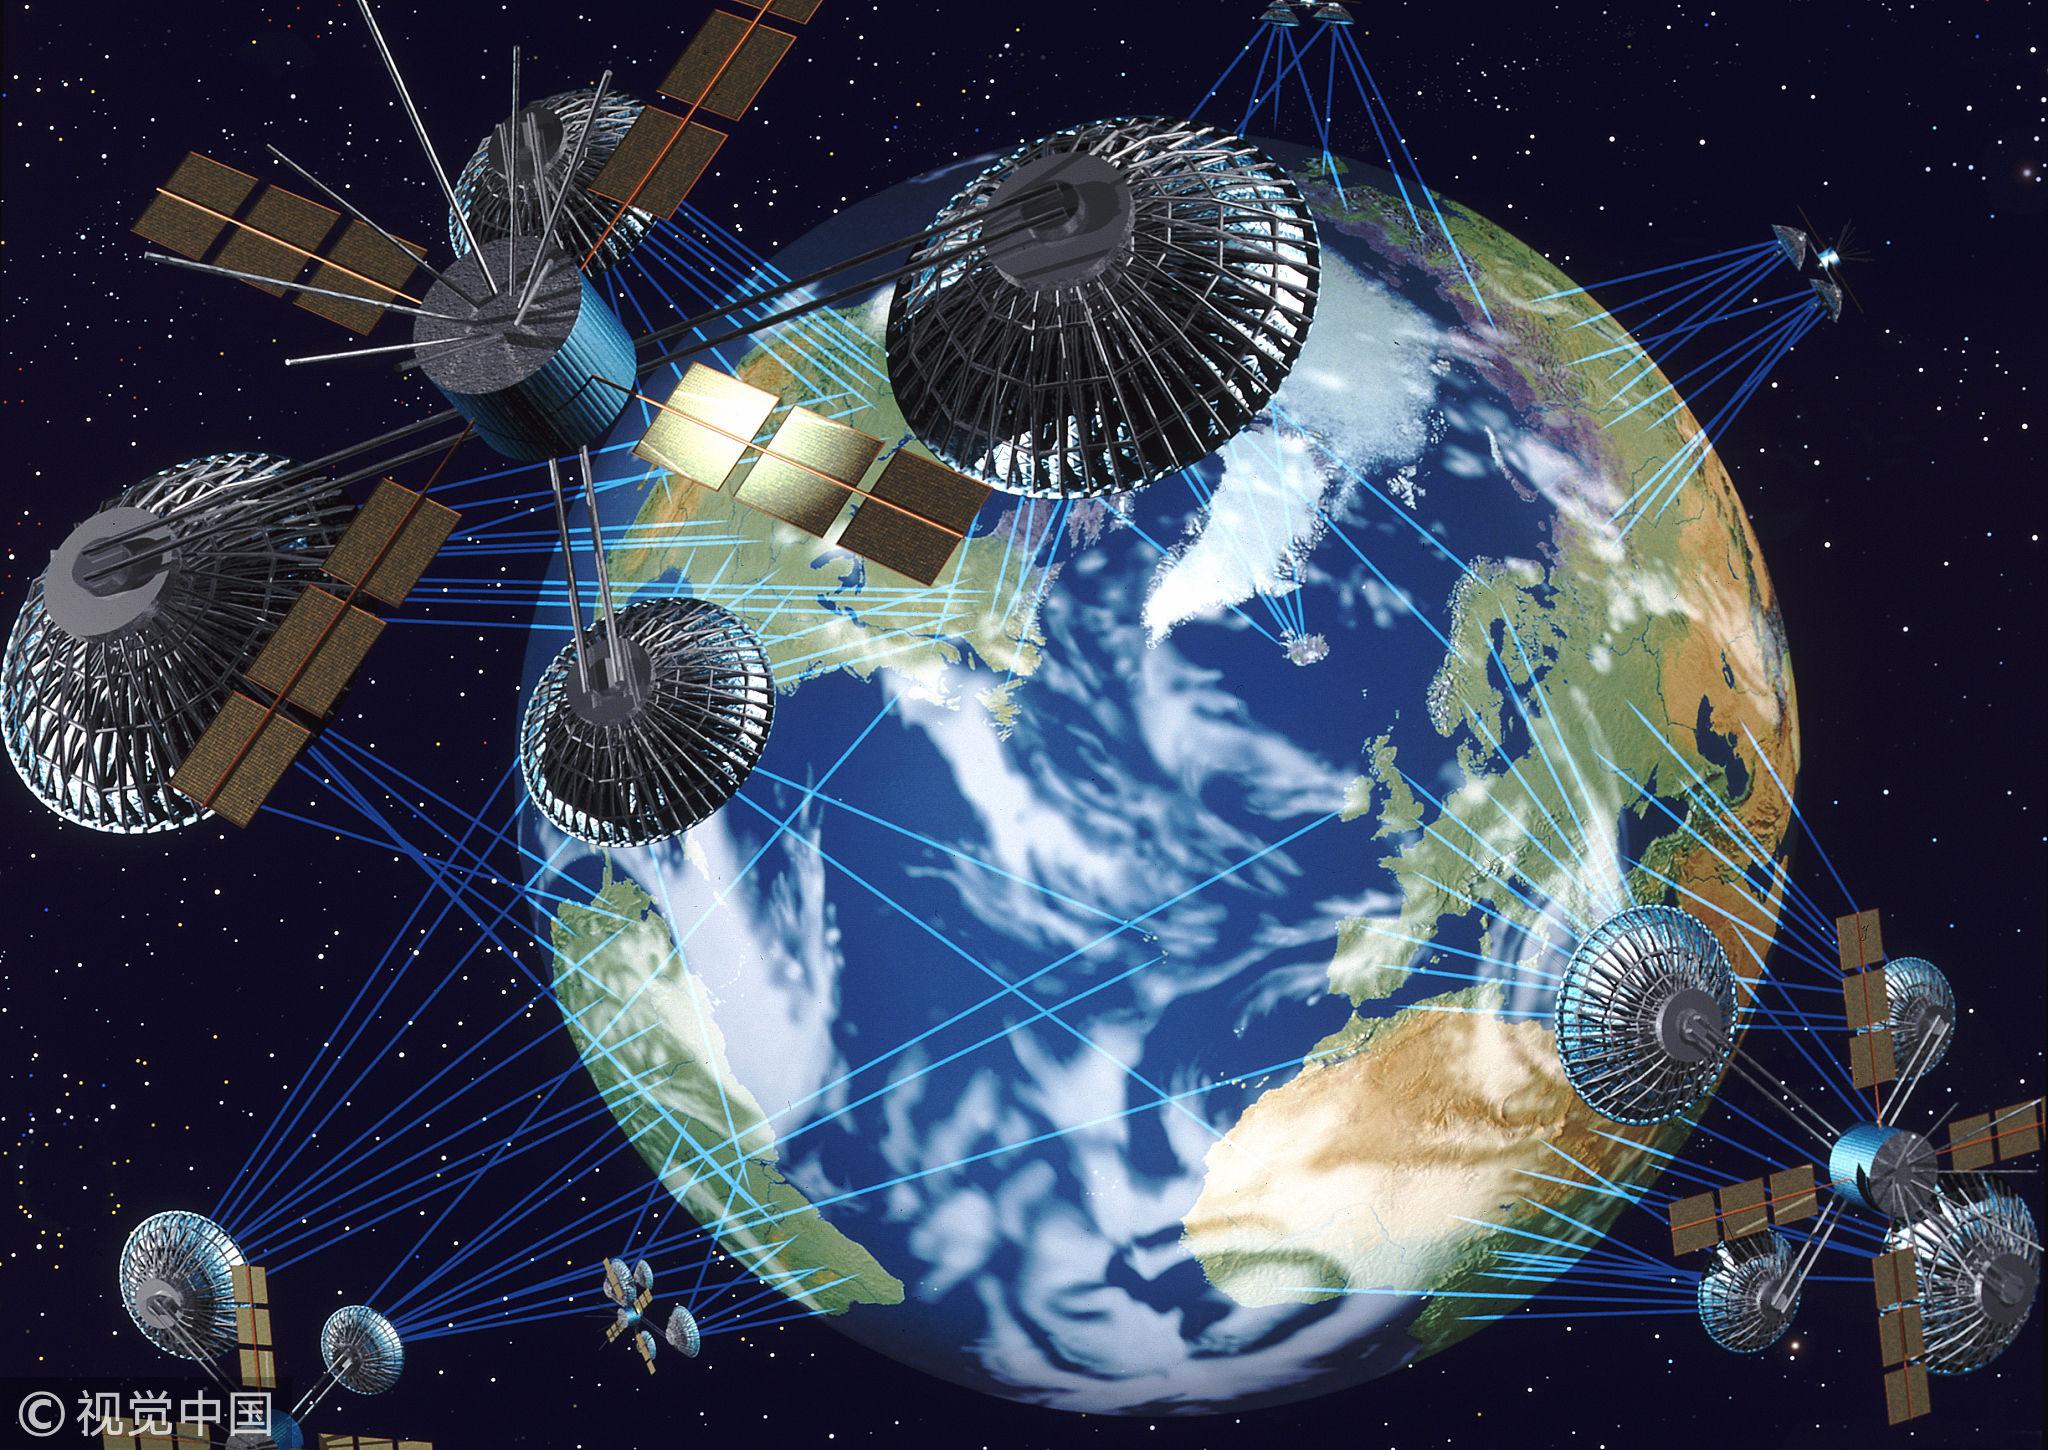 Space in Images - 2014 - 06 - European Data Relay System (EDRS)